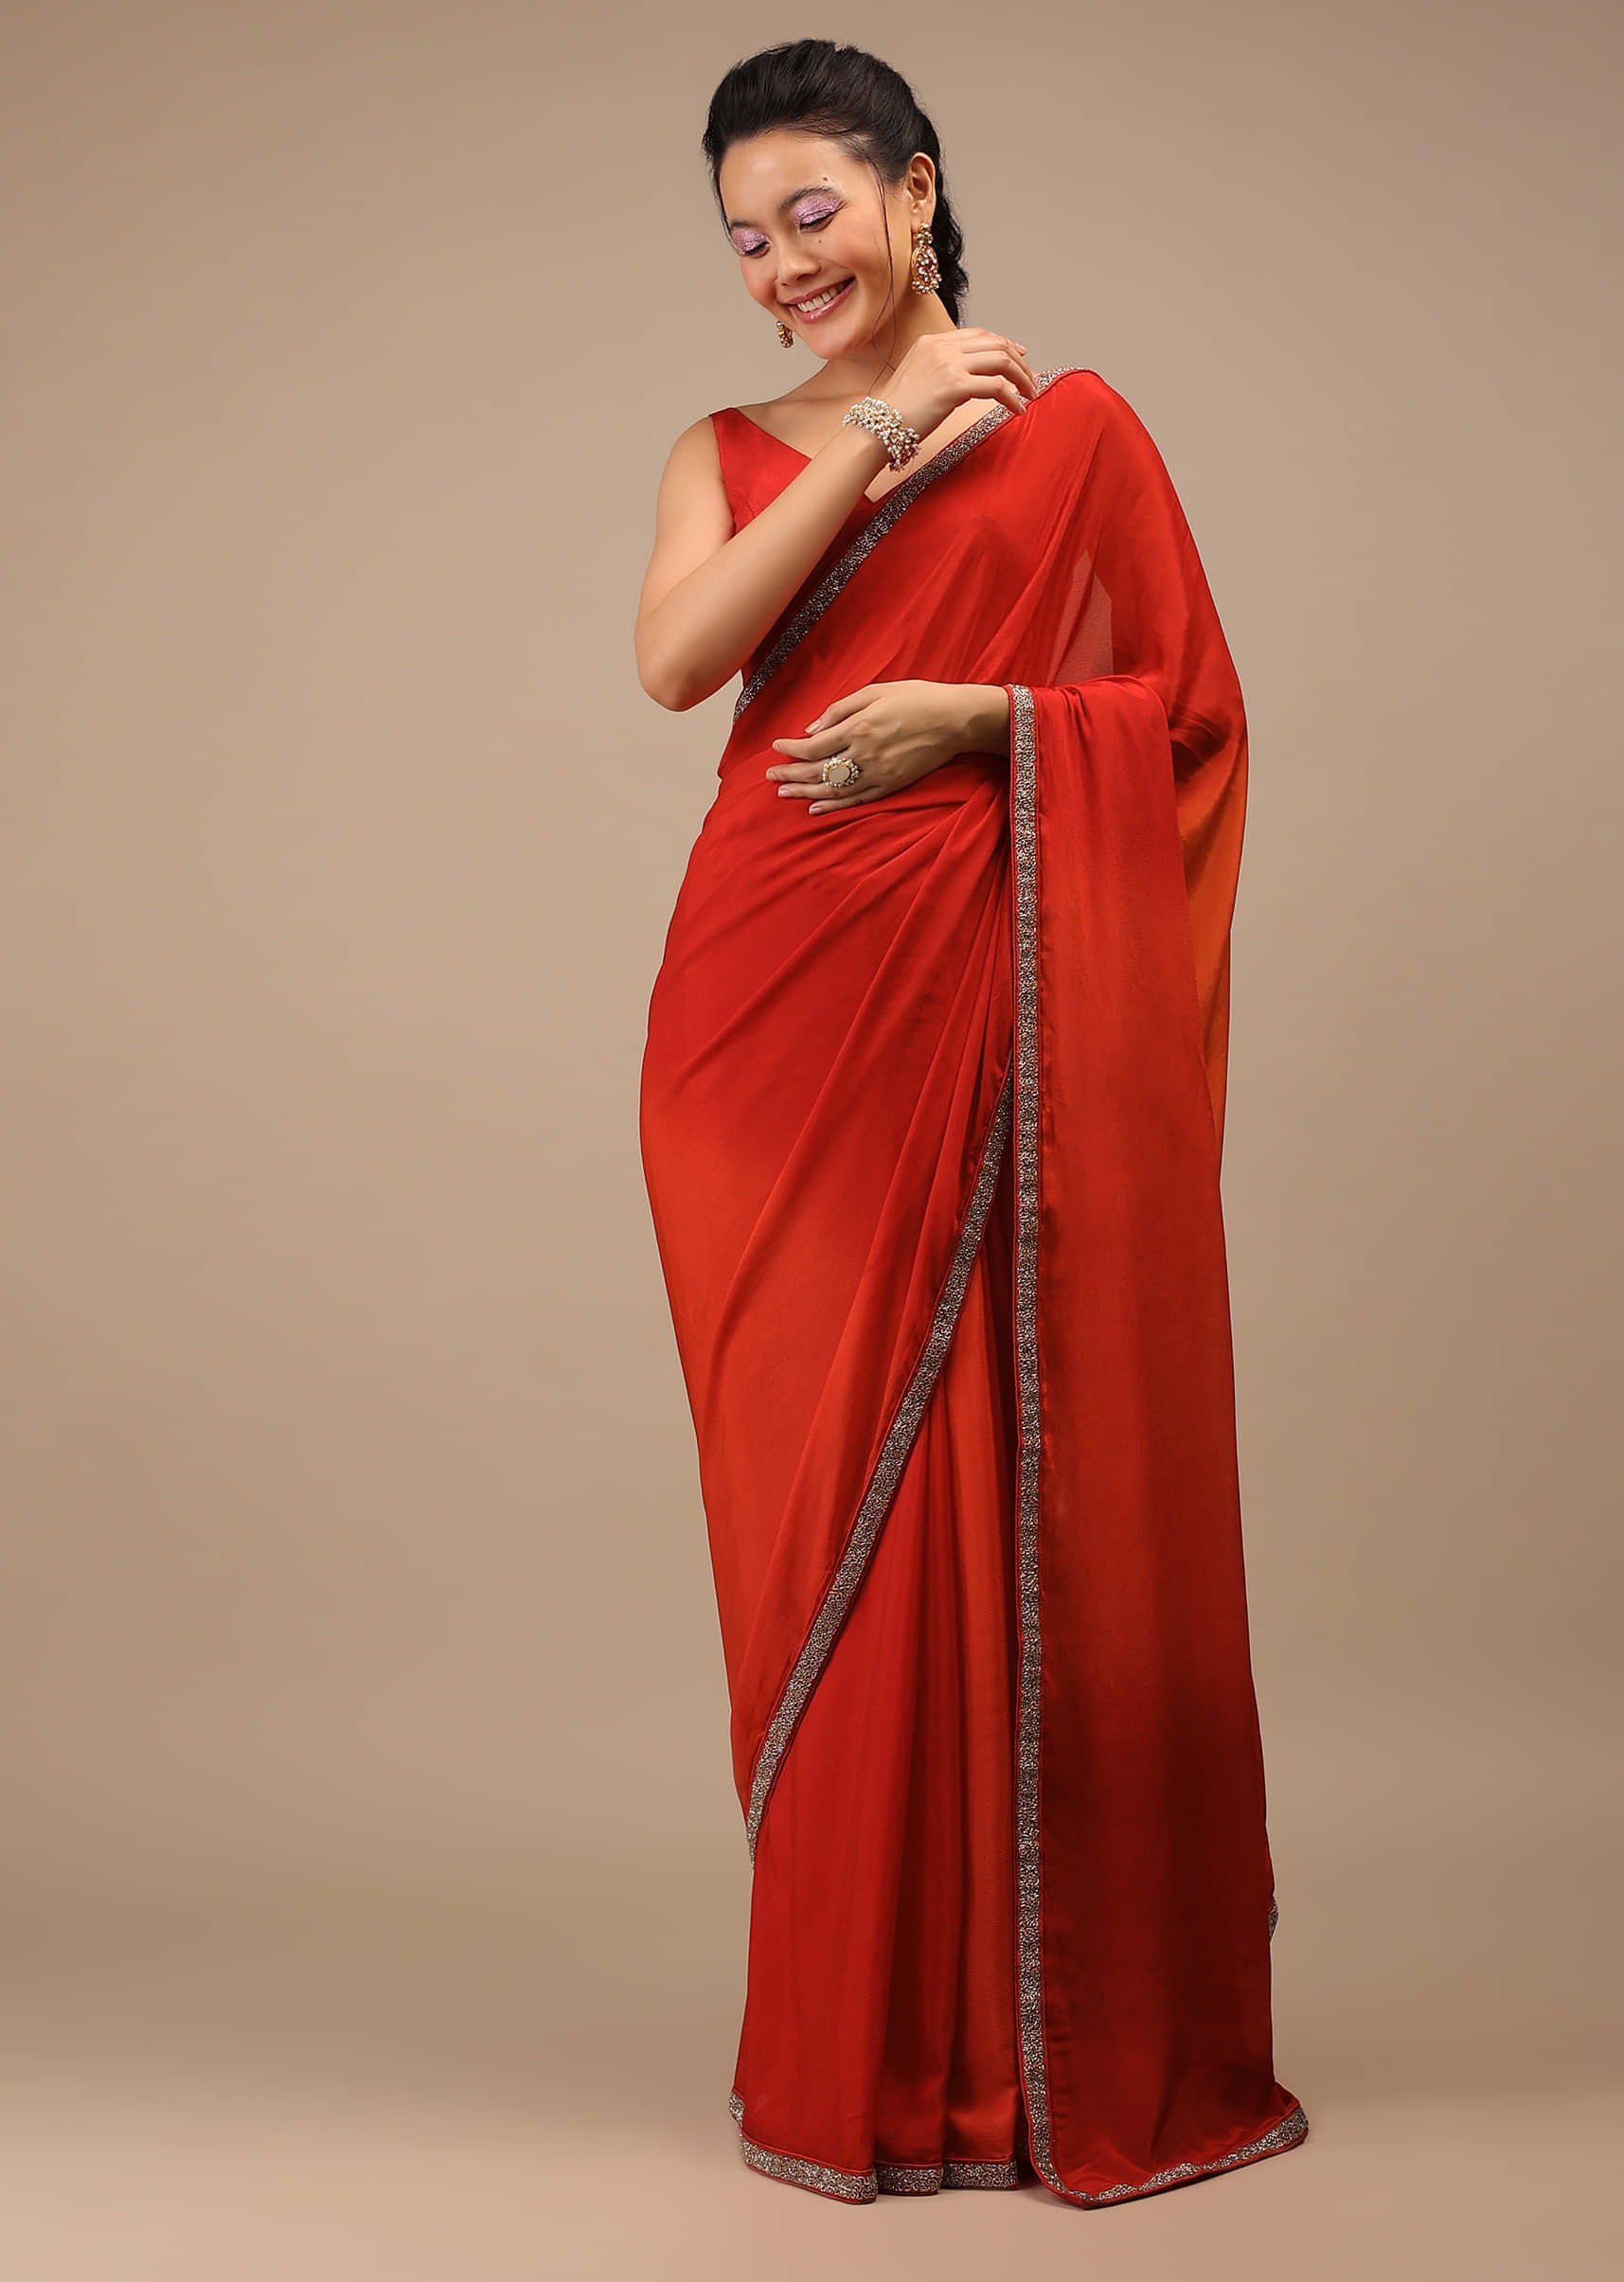 Red And Orange Chiffon Saree With Cut Dana Embroidery Buttis